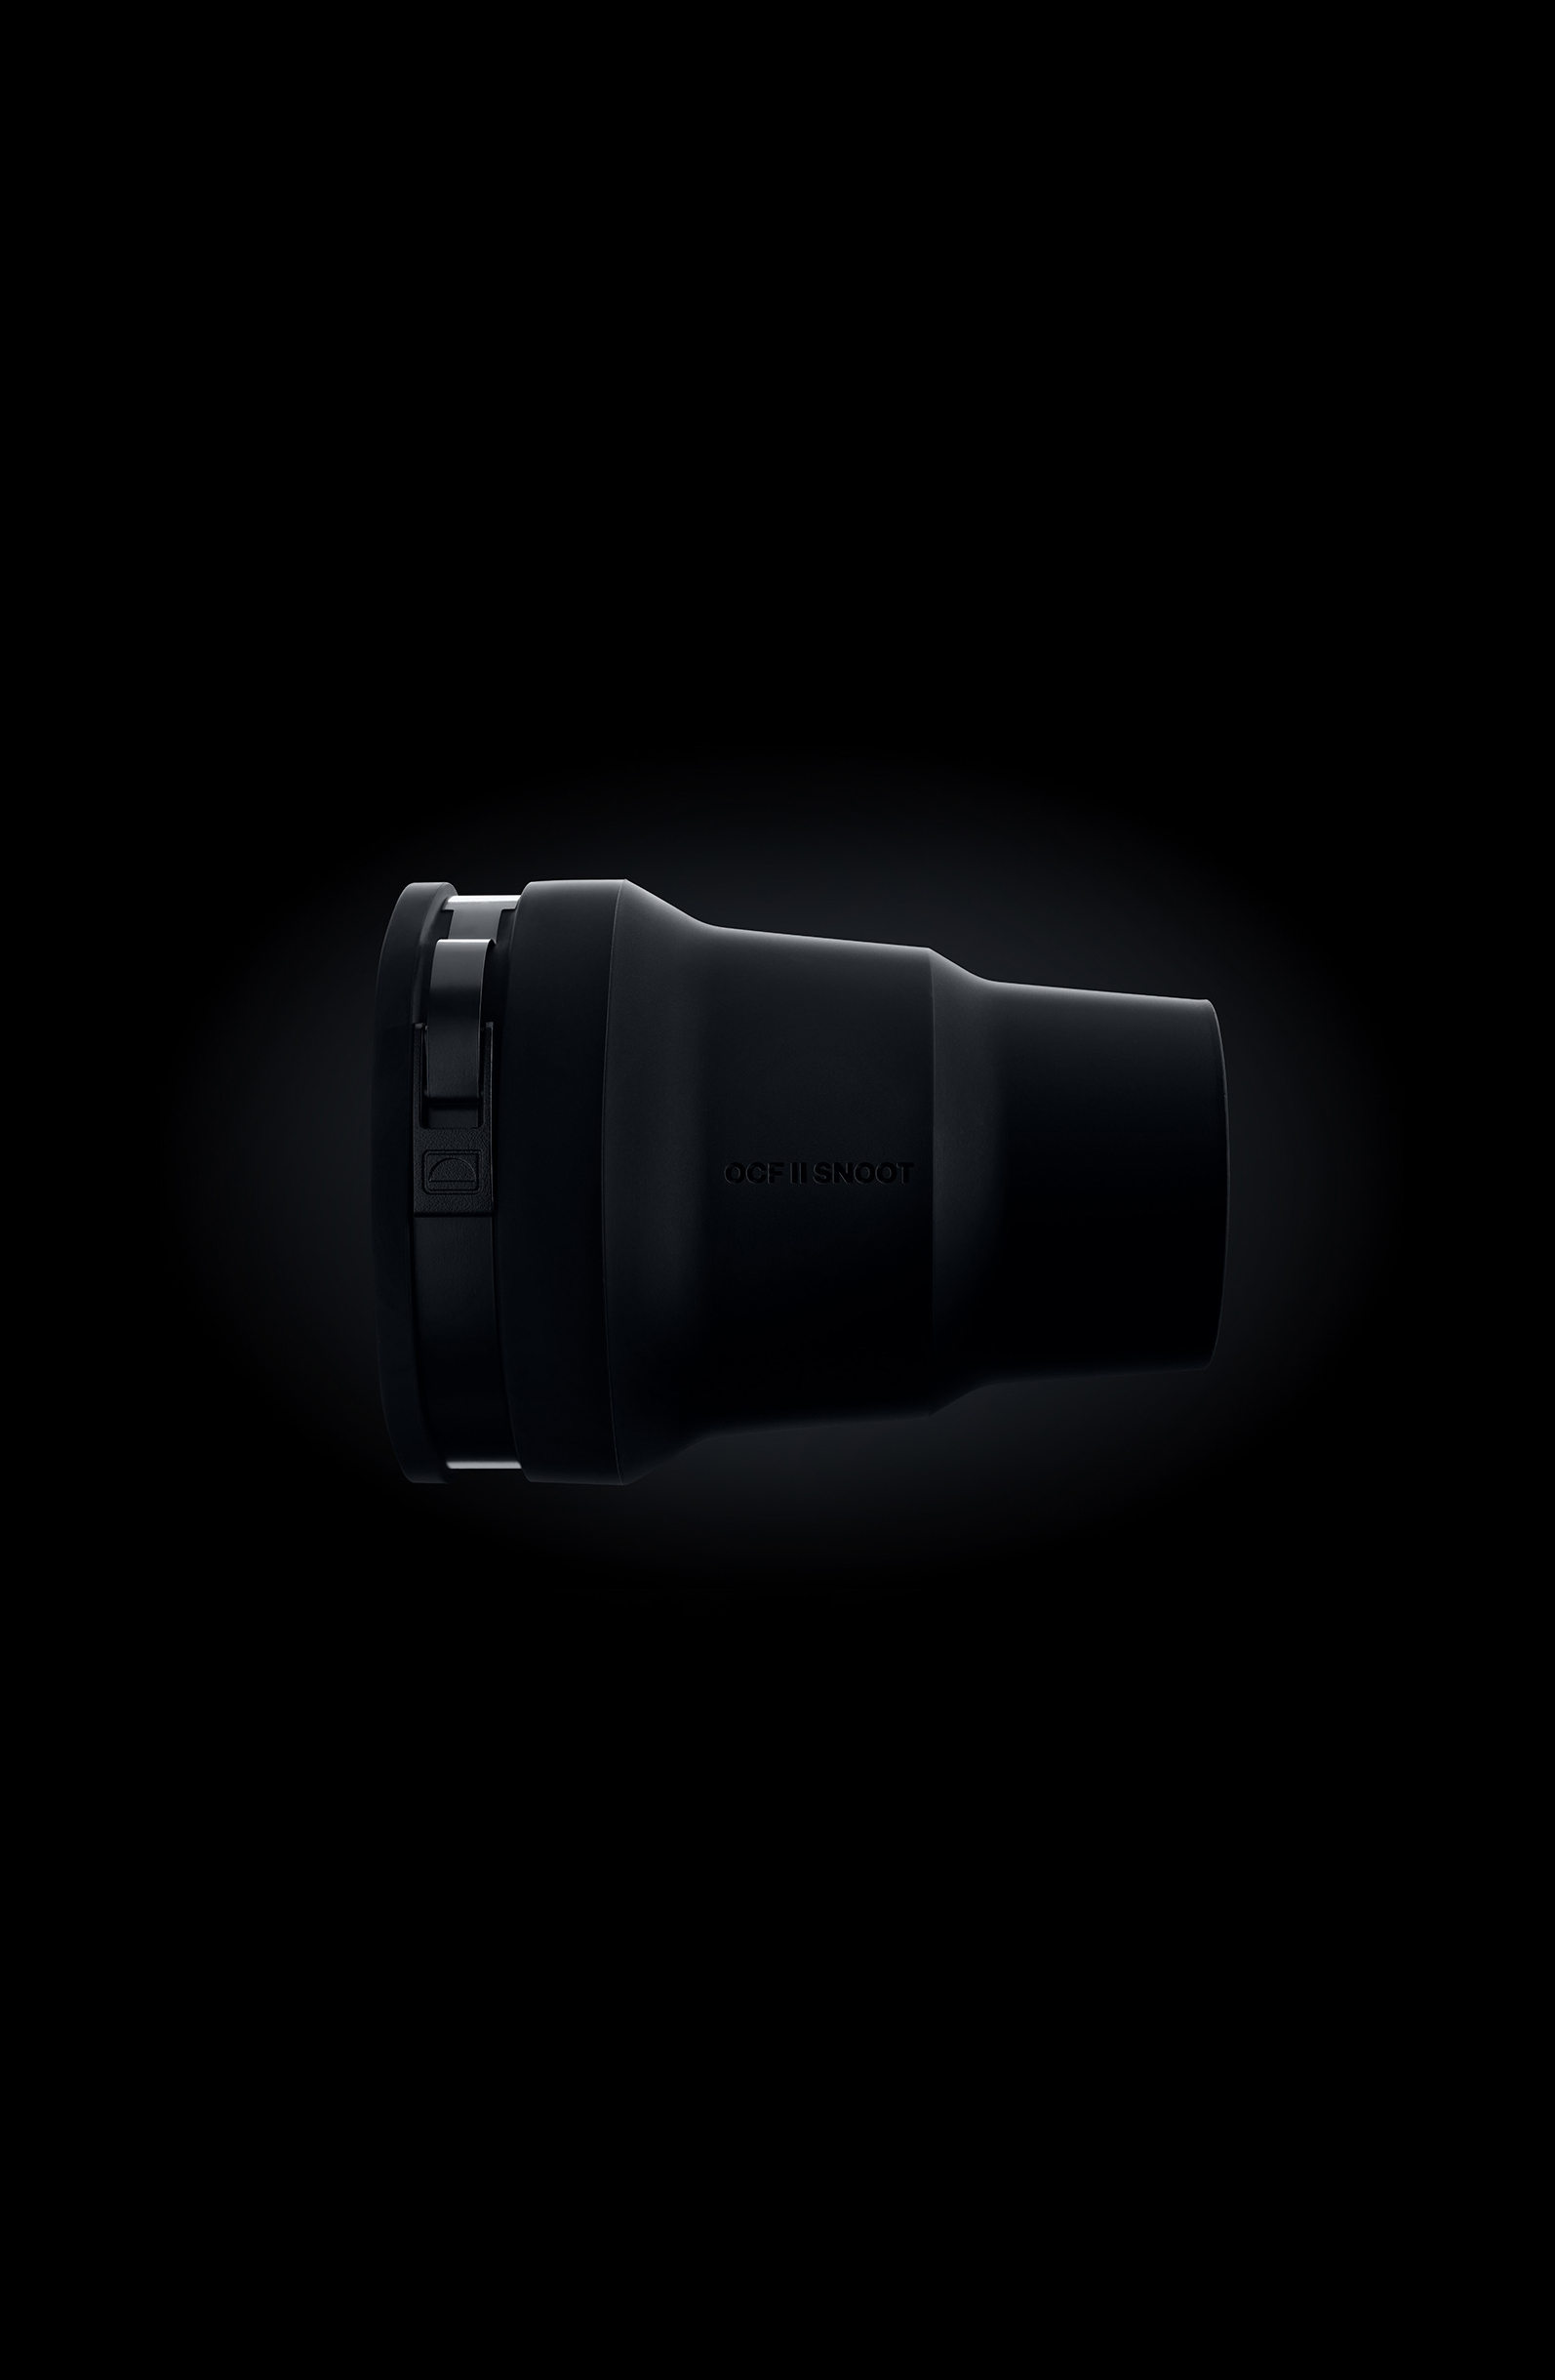 What's new with the OCF II Snoot from Profoto?